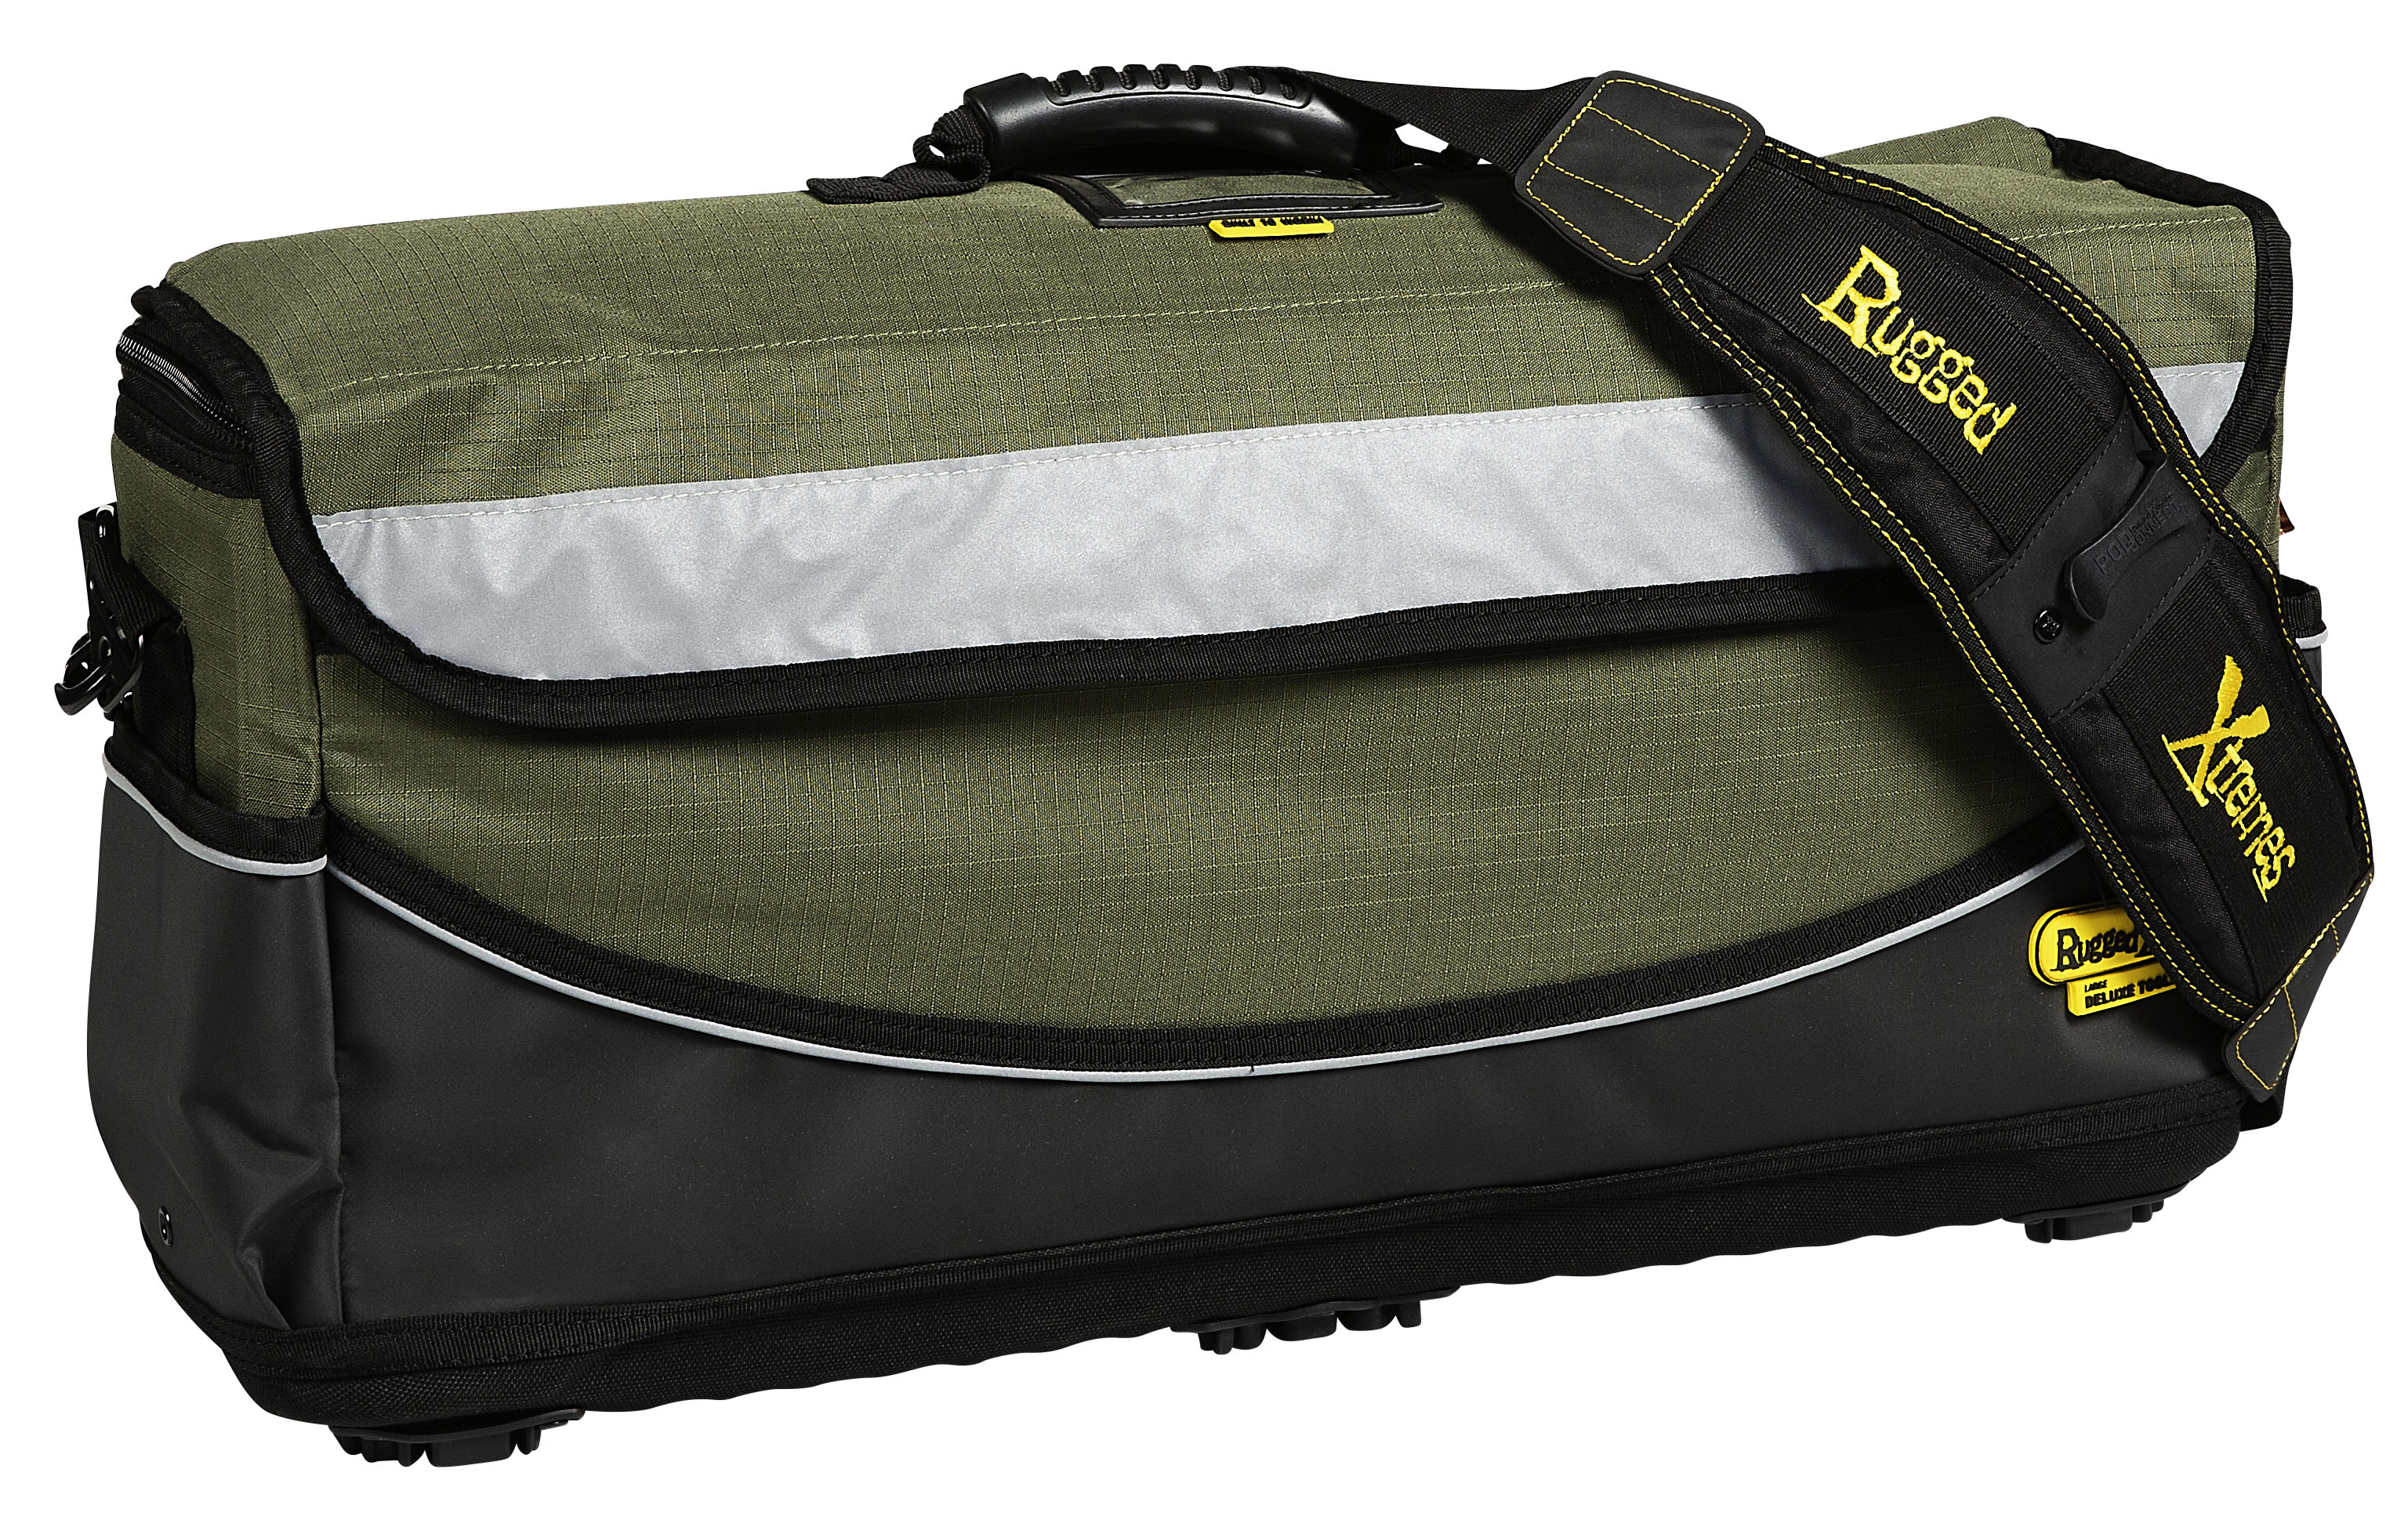 DELUXE CANVAS TOOL BAG LARGE 600x270x150mm